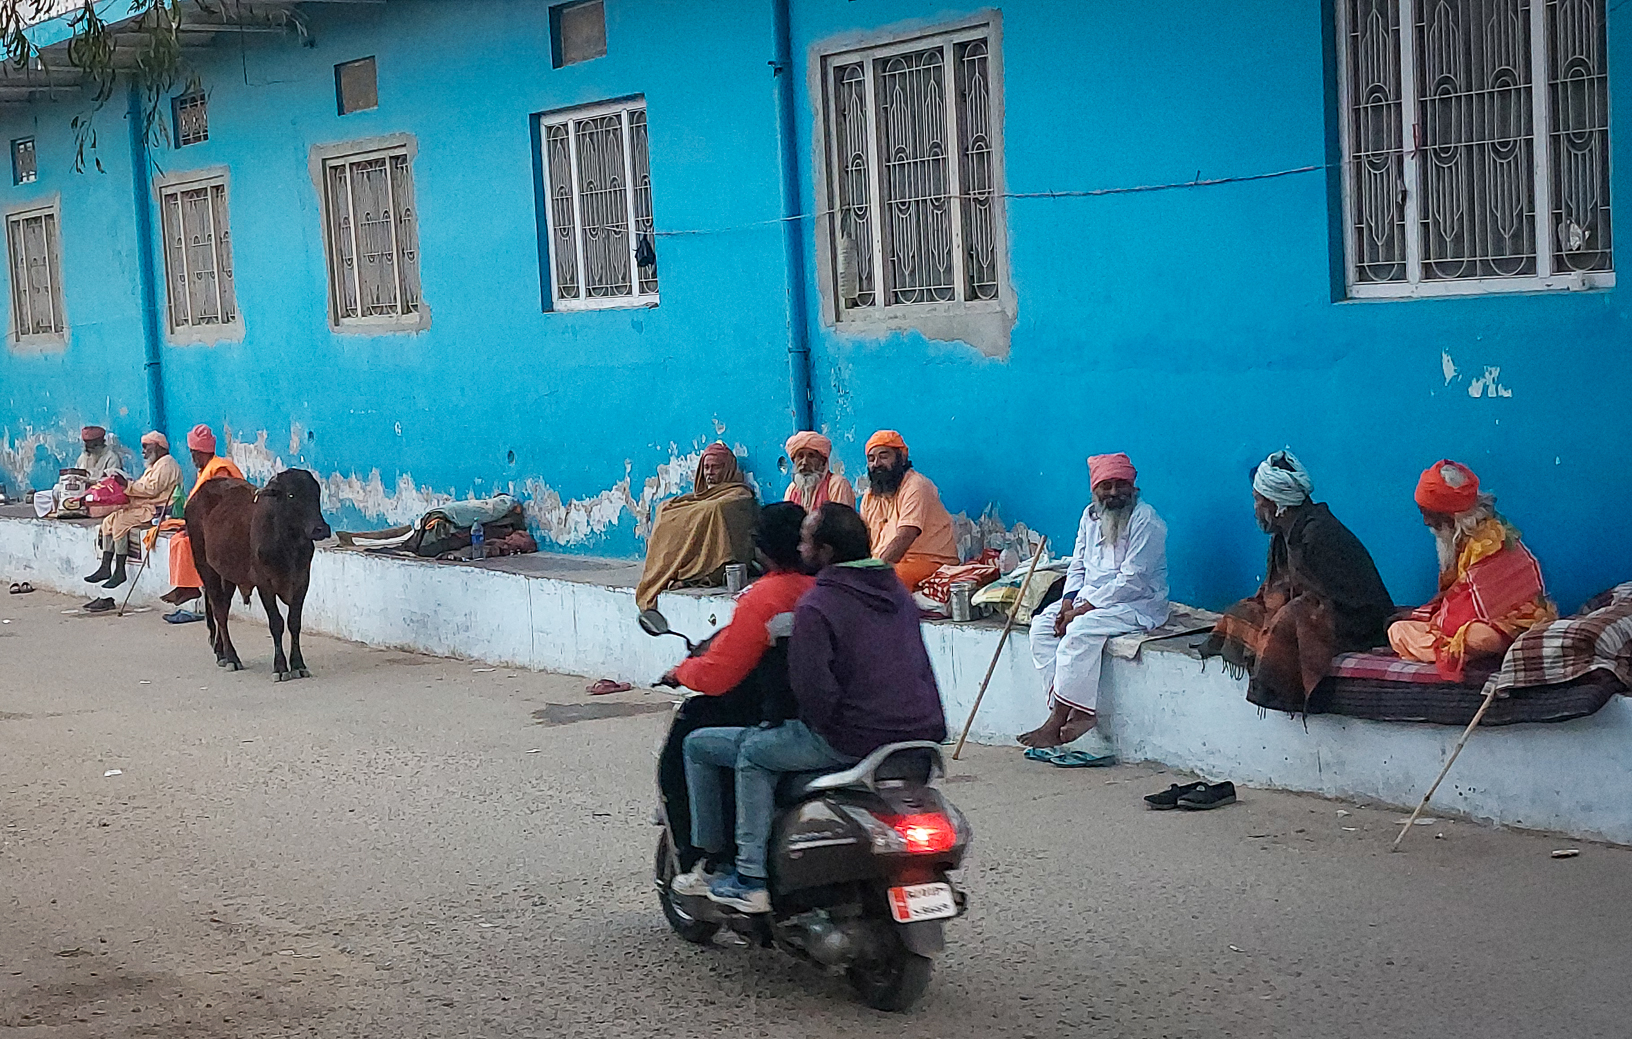 <span  class="uc_style_uc_tiles_grid_image_elementor_uc_items_attribute_title" style="color:#ffffff;">Wise Man (Gurus?) sitting at the edge of the road, waiting for ...what!?</span>